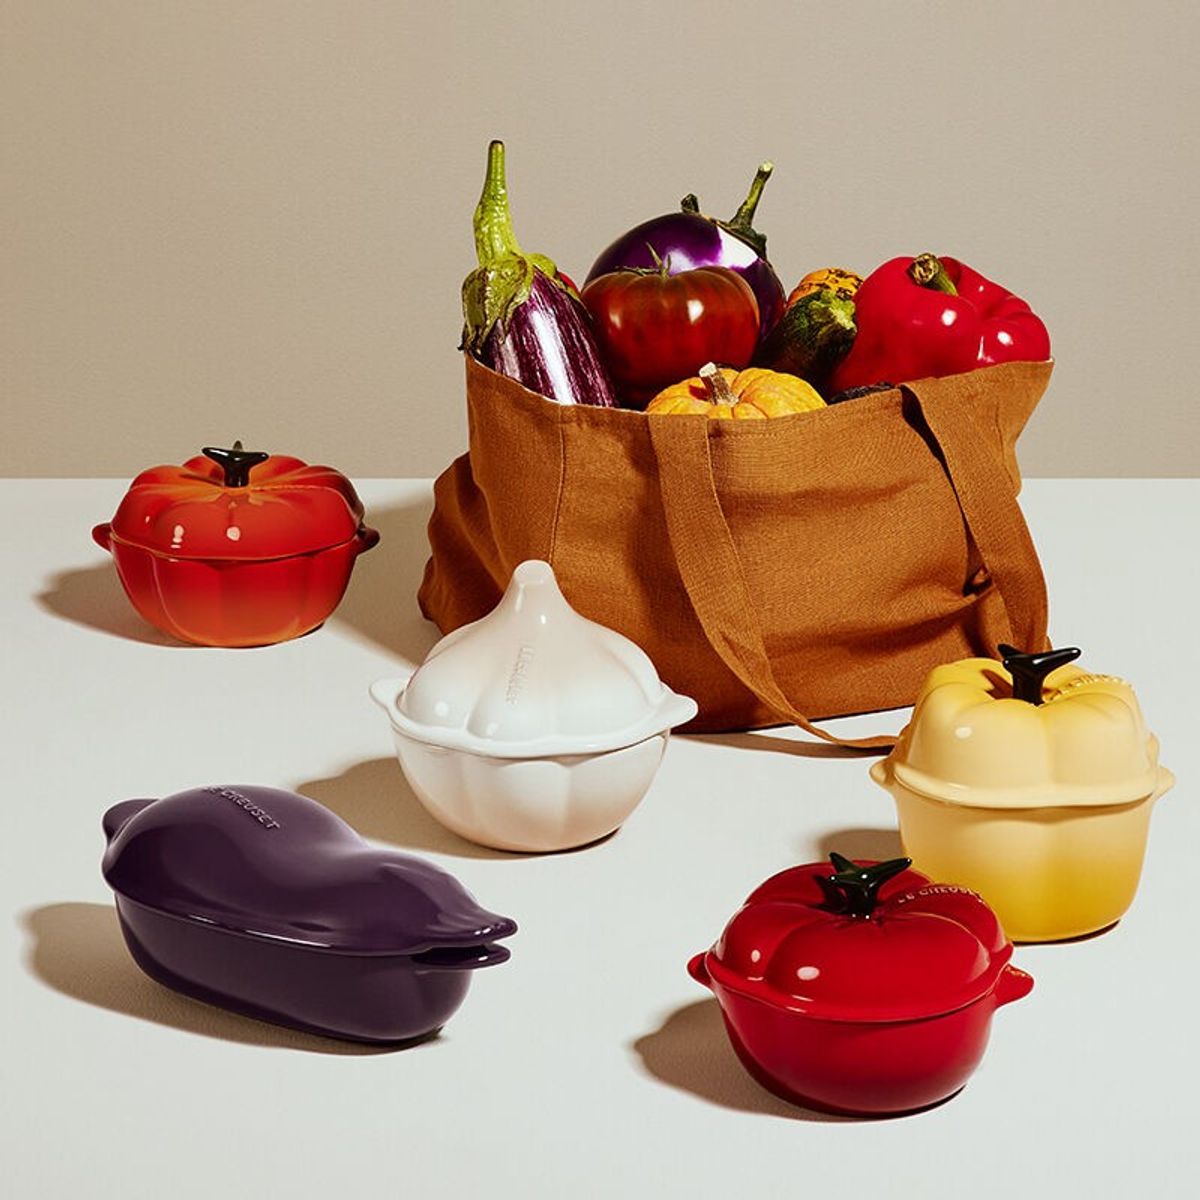 the le creuset fall harvest collection features fruit and vegetable-shaped casserole dishes